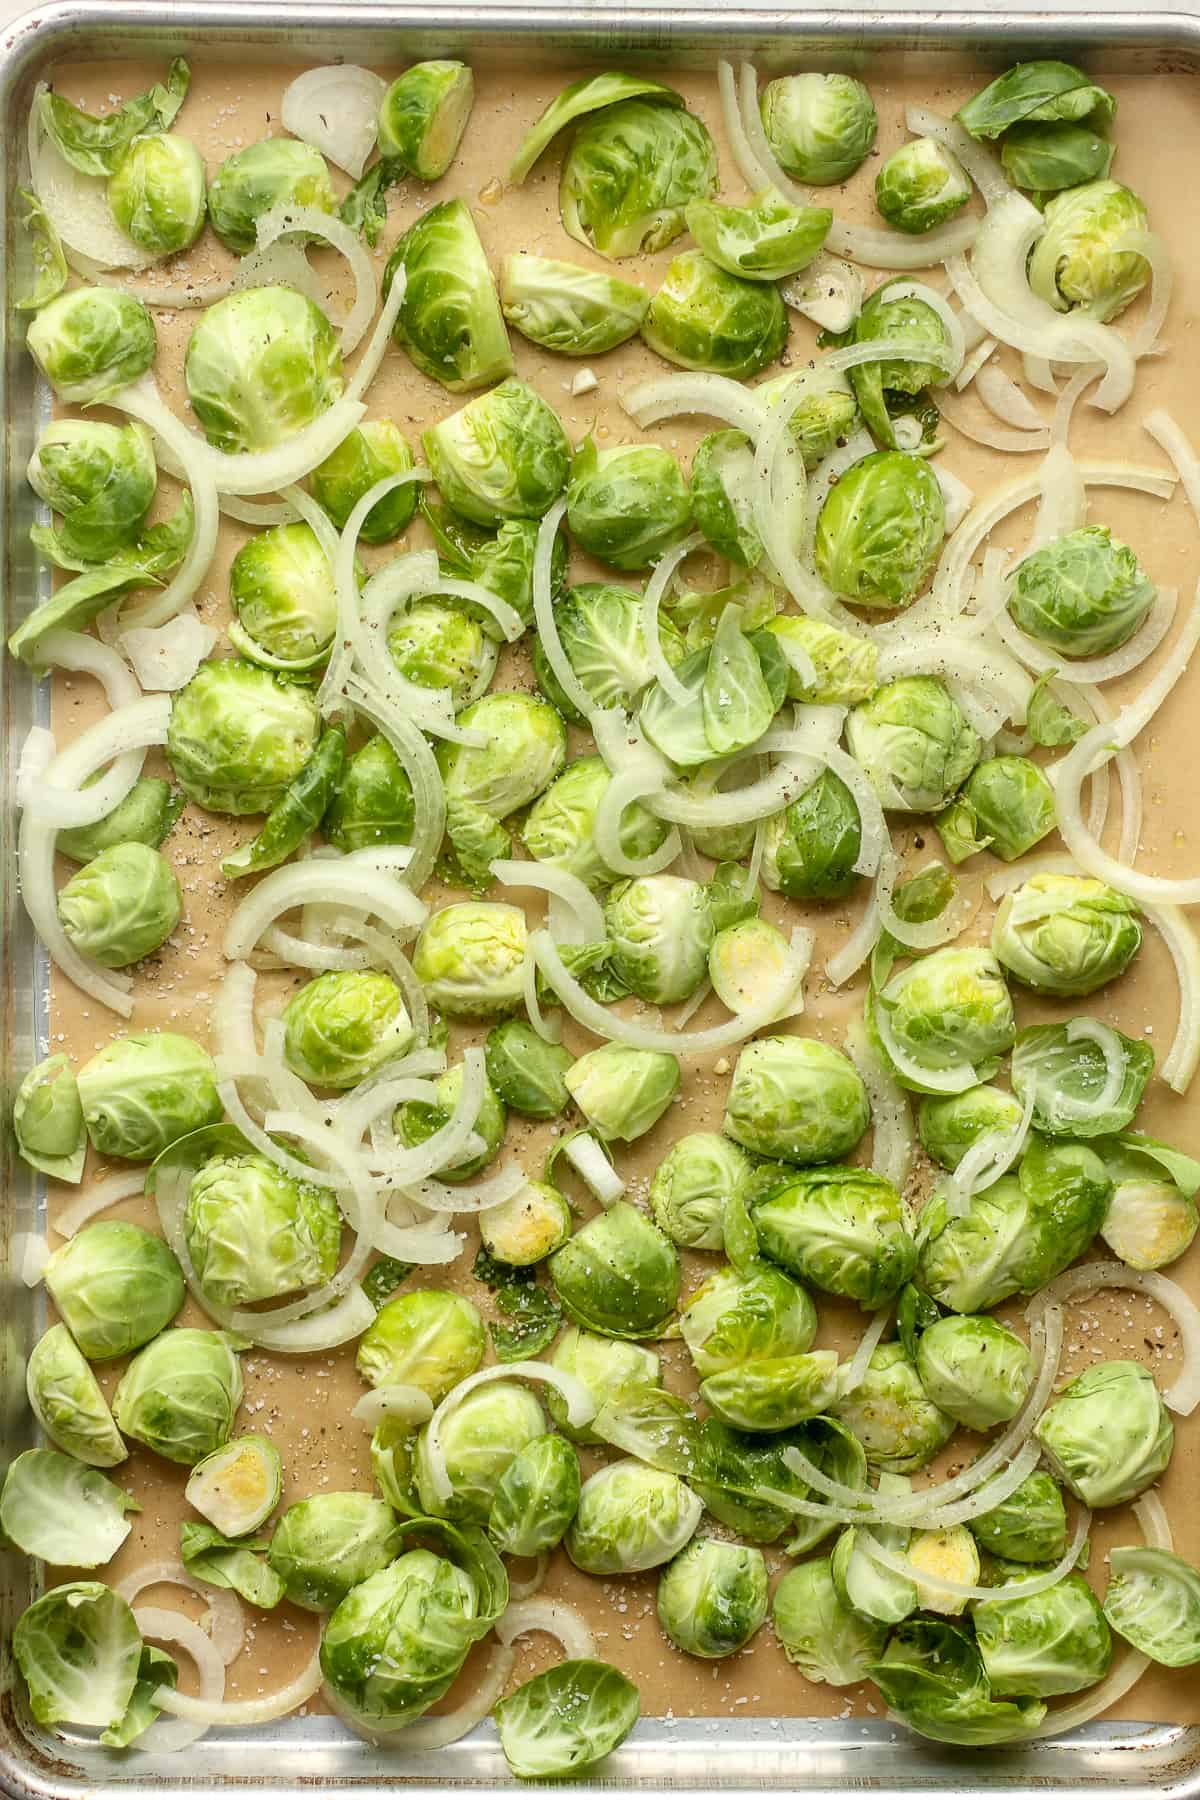 A pan of the raw brussels sprouts and sliced onion.